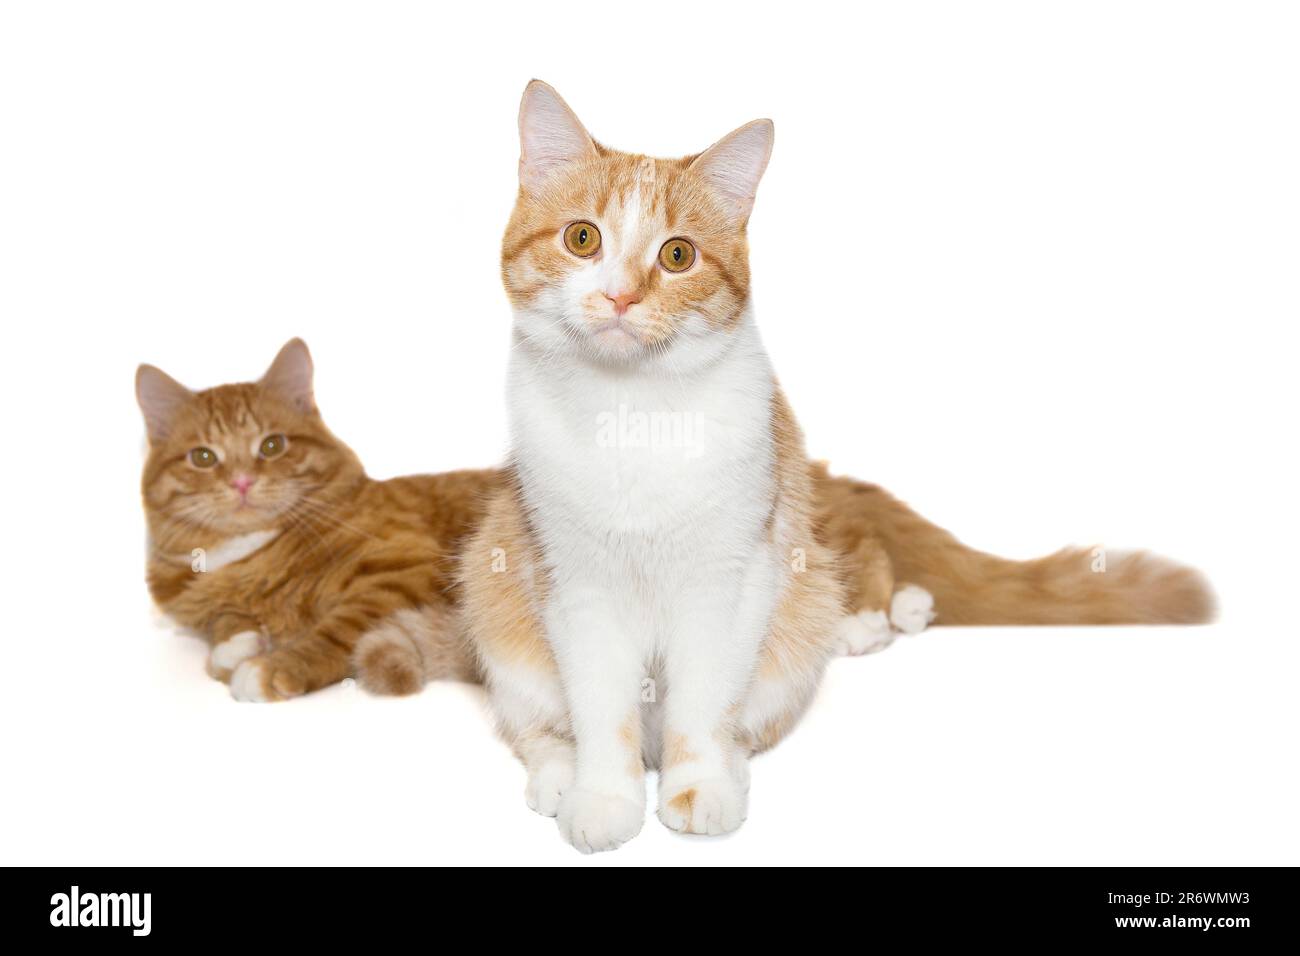 Two red cats are sitting together, on a white background. Stock Photo